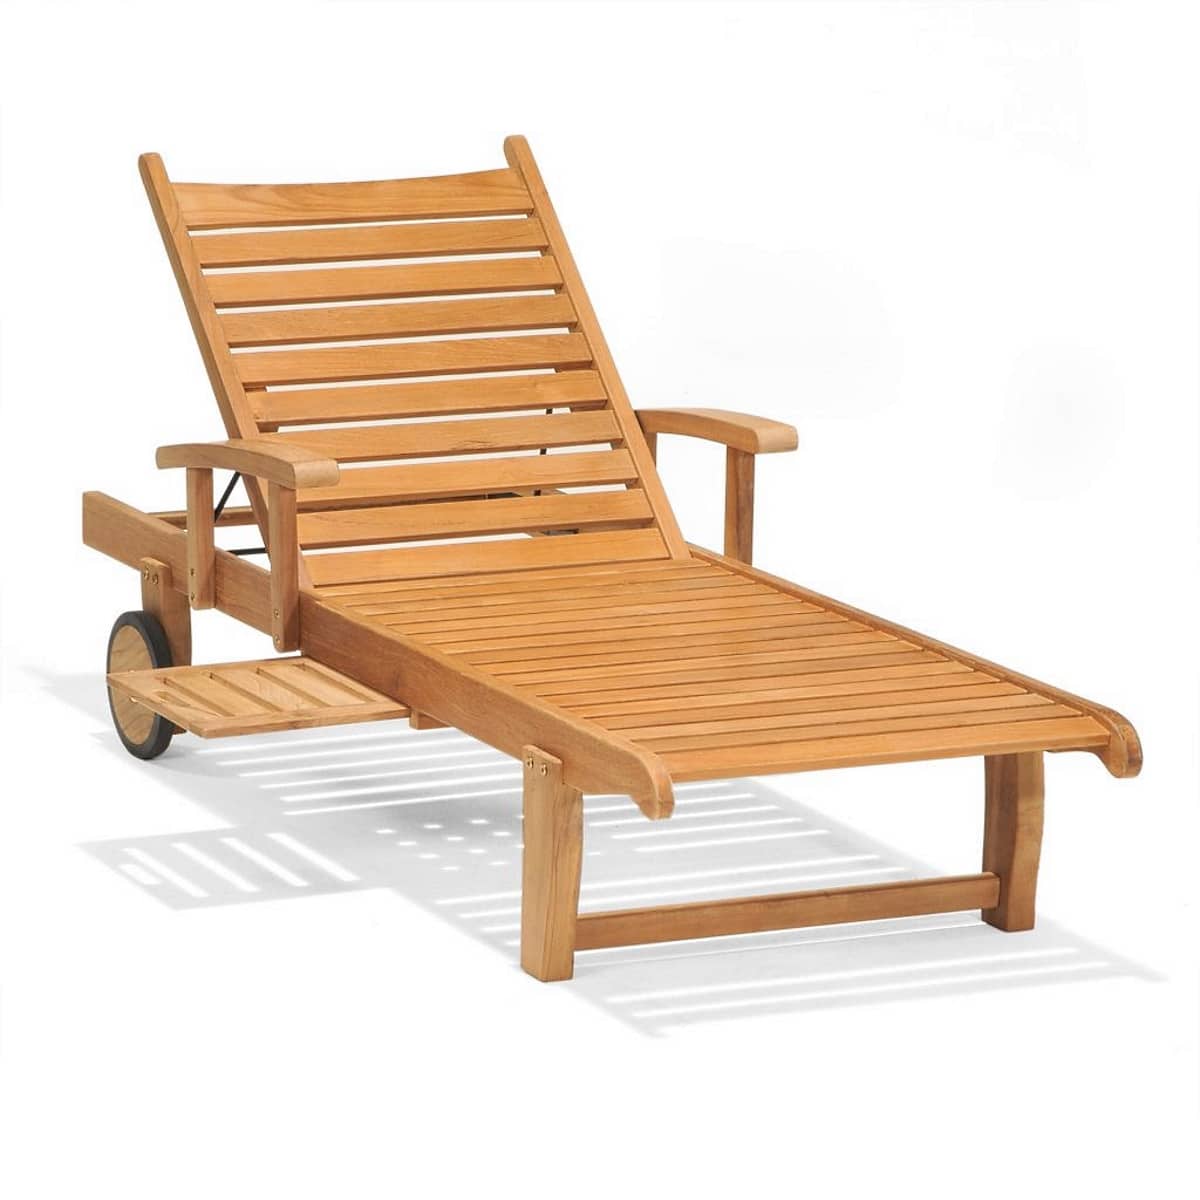 Forever Patio Universal Teak Adjustable Chaise Lounge w/Arm FP-UNIT-2030-SACL-A-Teak Seating Forever Patio 